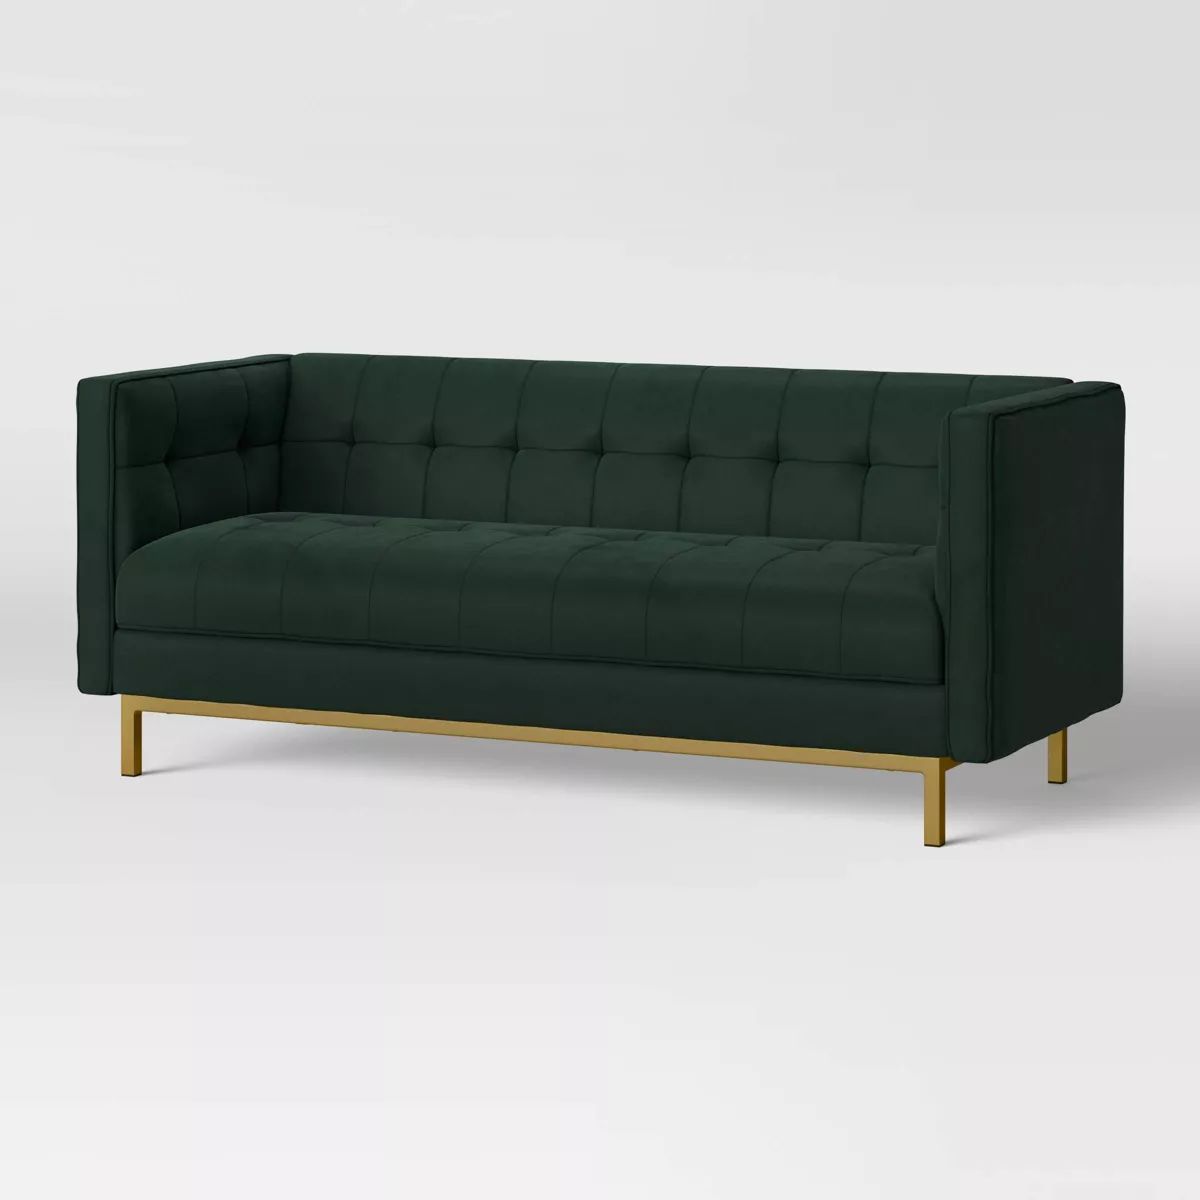 Cologne Tufted Track Arm Sofa Emerald Green - Threshold™ | Target